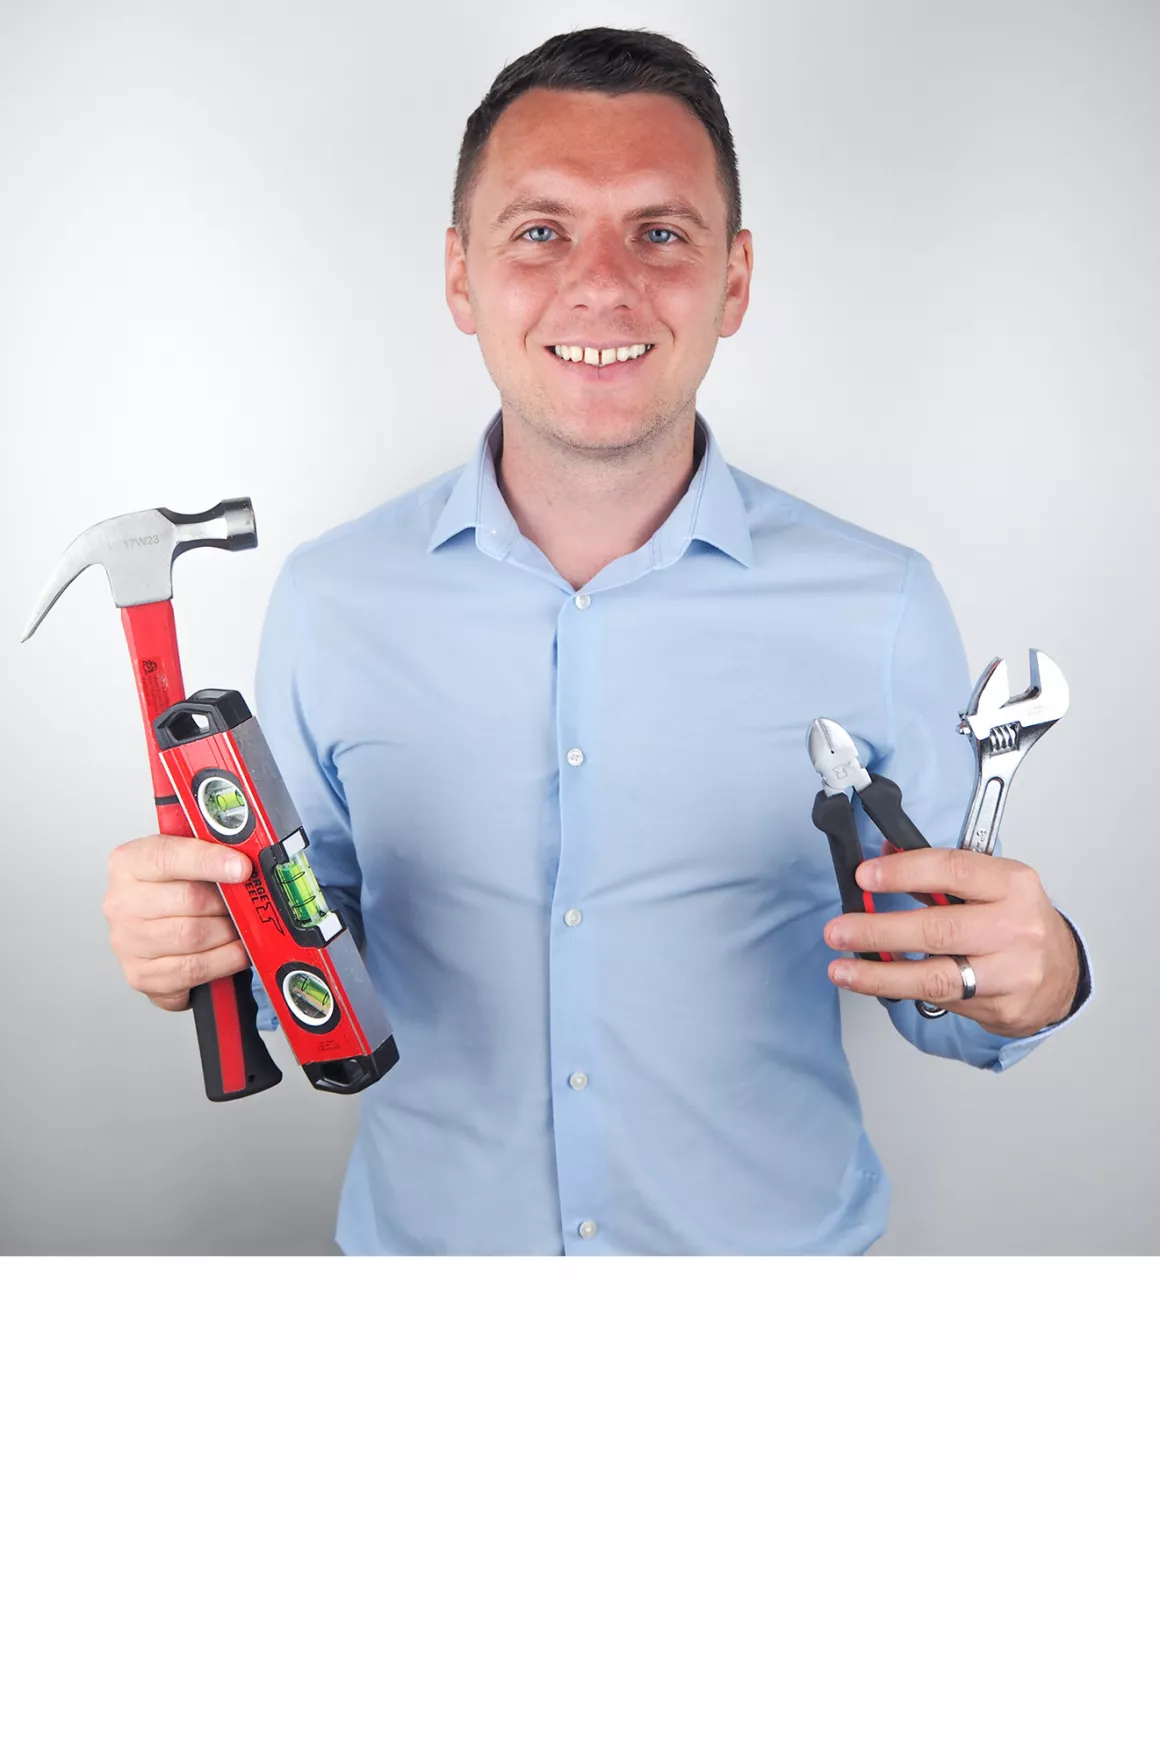 Mark Everitt (Team Leader) wearing blue shirt and holding DIY drops, photo taken at Prime Appointments HQ, with white background